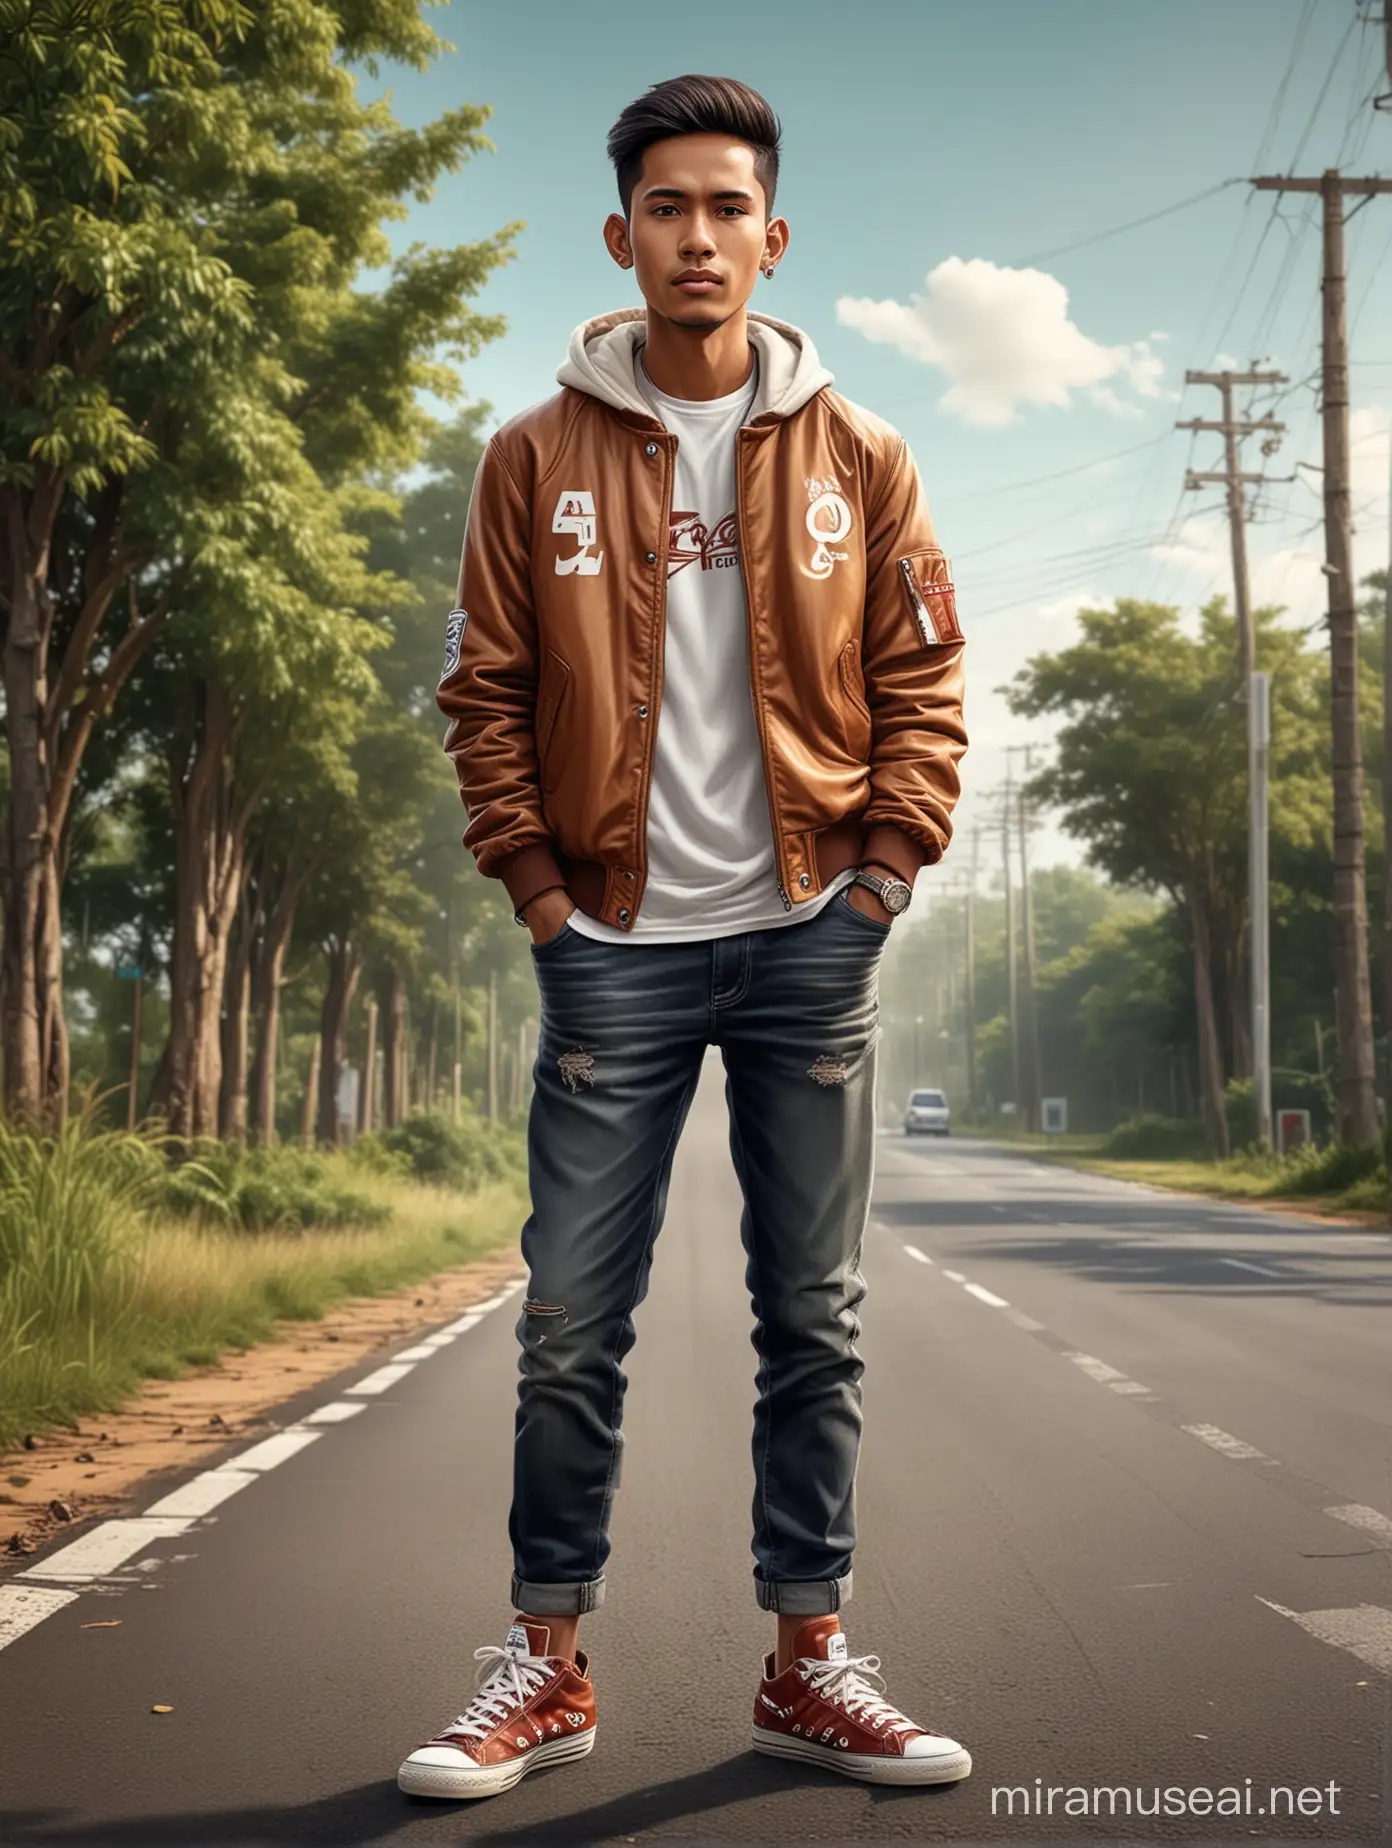 Creators ultra Realistic caricature of Indonesian handsome youth wearing a varsity jacket that says " Marrons ", sneakers, standing in great pose on a busy rural road, Dramatic effects, ultra detailed caricatures,ultra realistic photos.